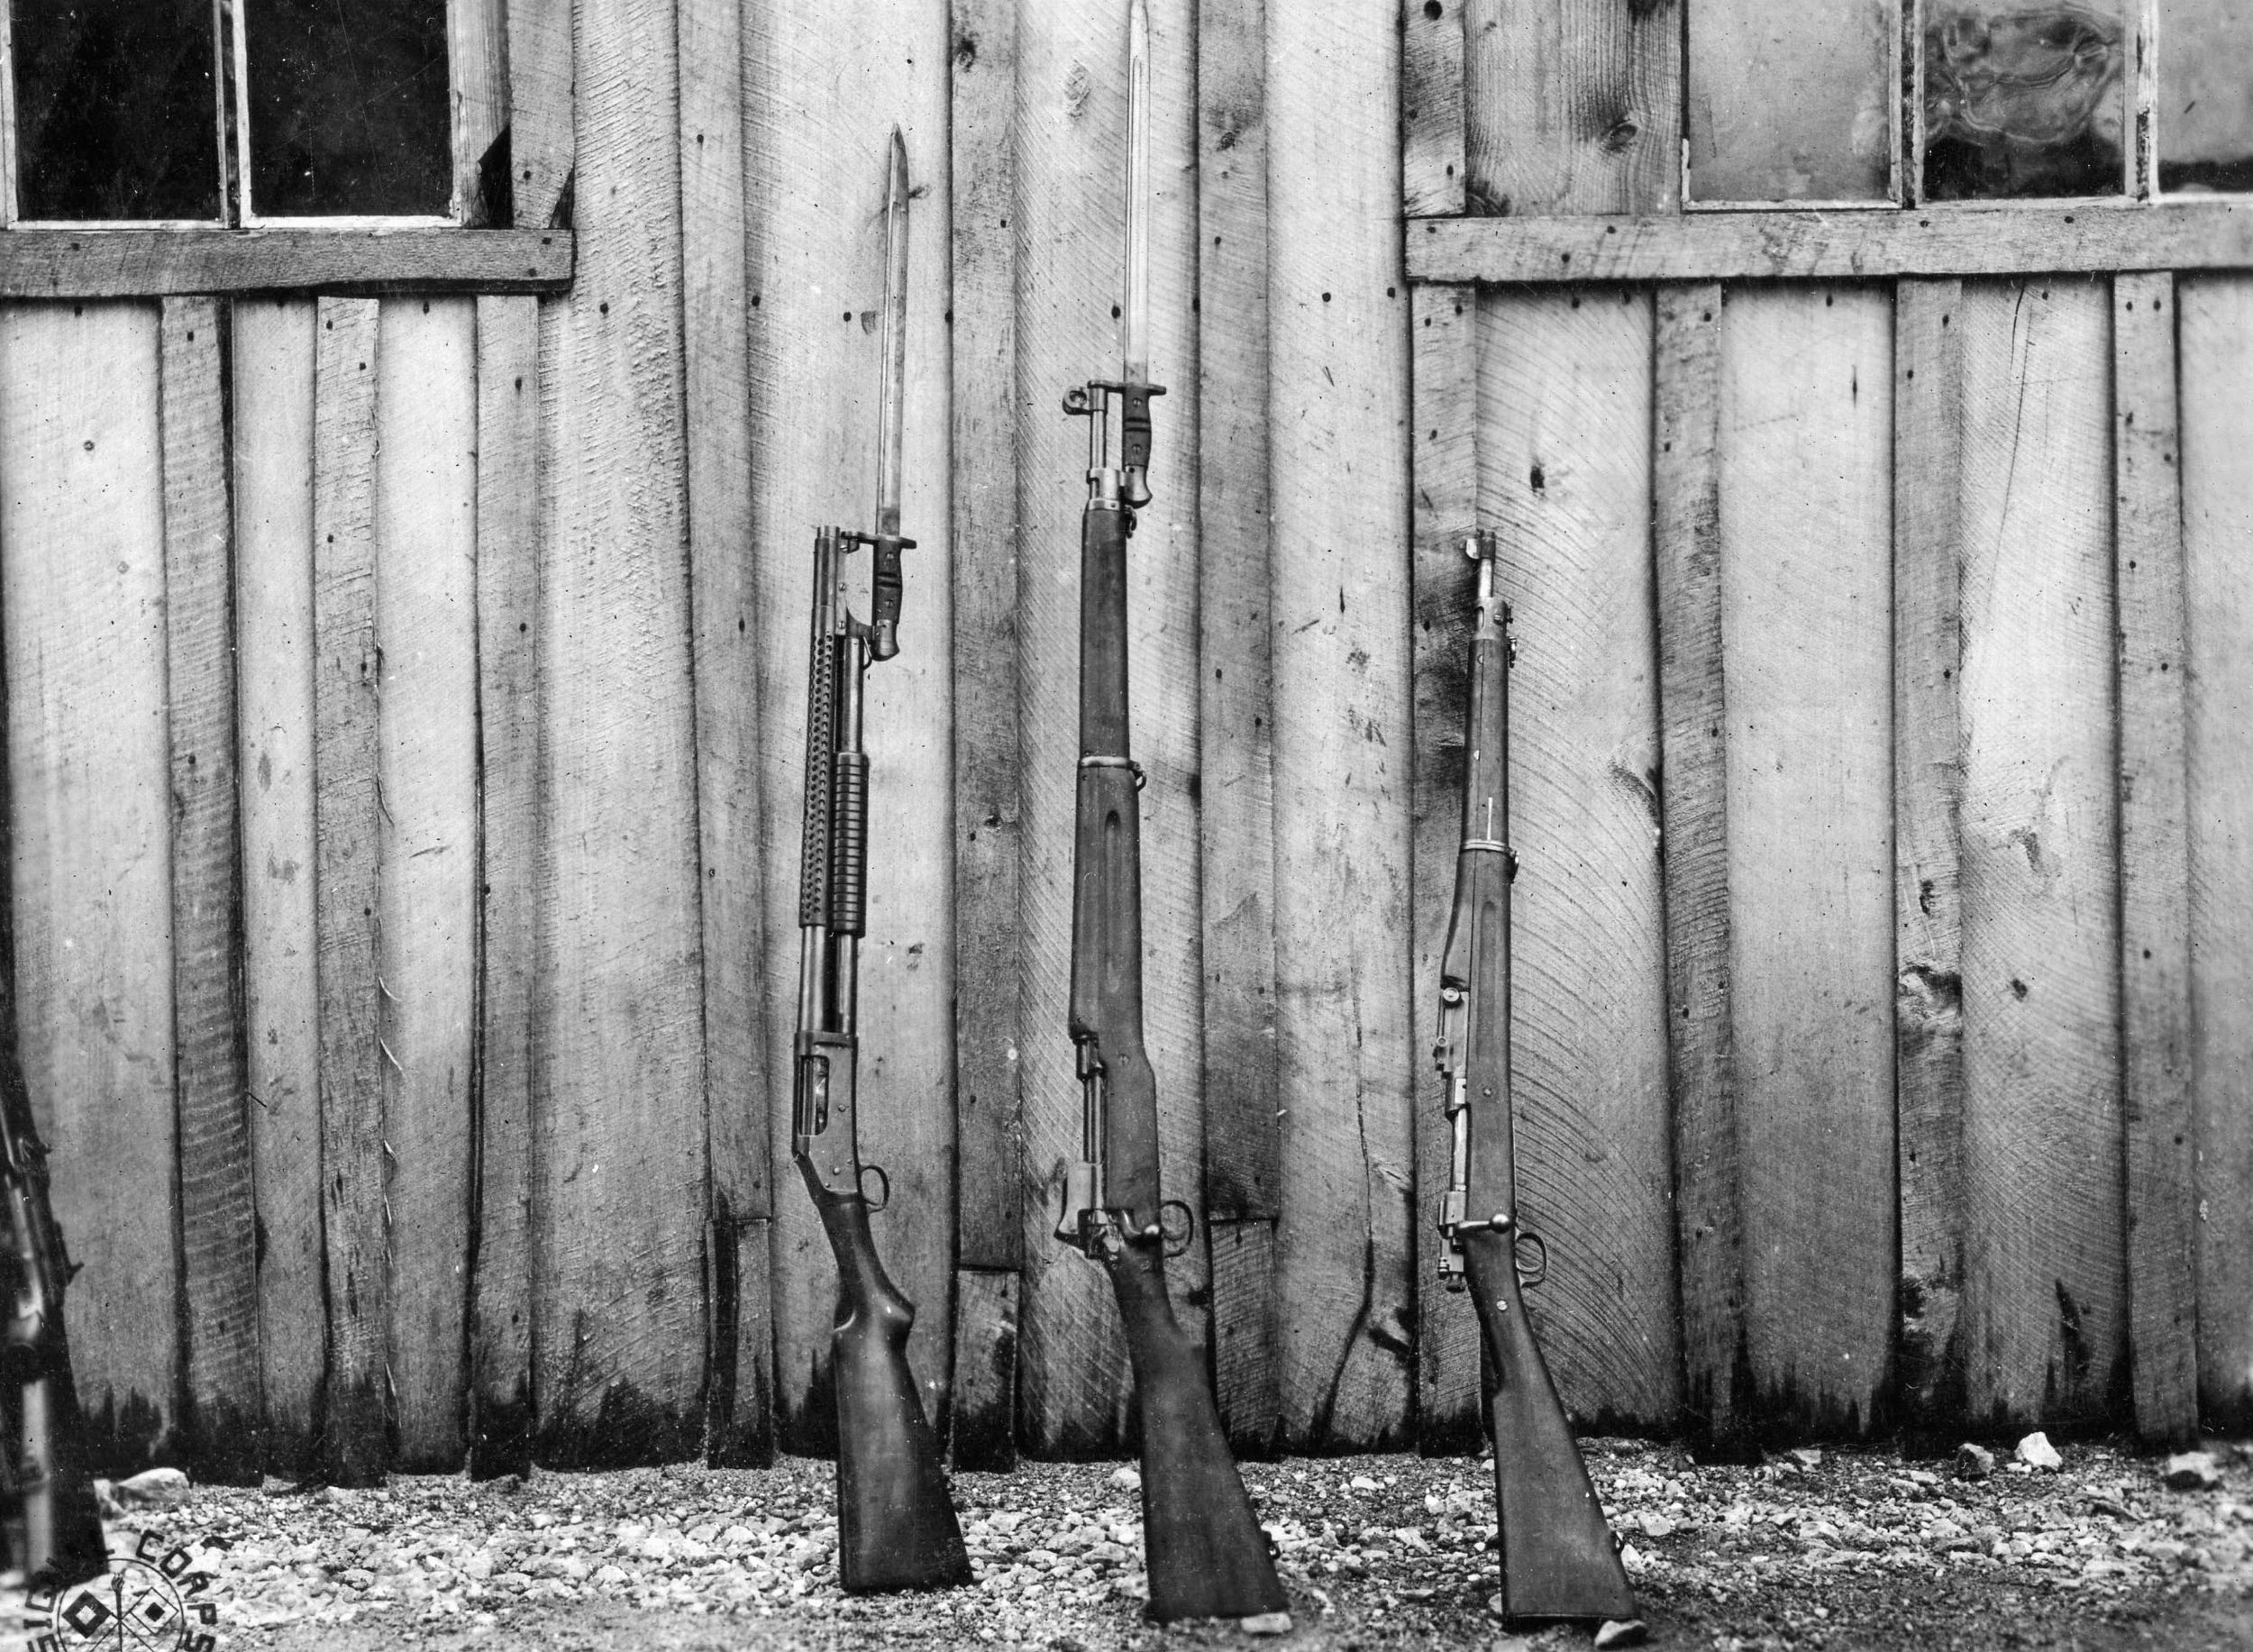 World War I-era arms, left to right, include the 12-gauge shotgun with bayonet attached, American Enfield, and Springfield rifles.